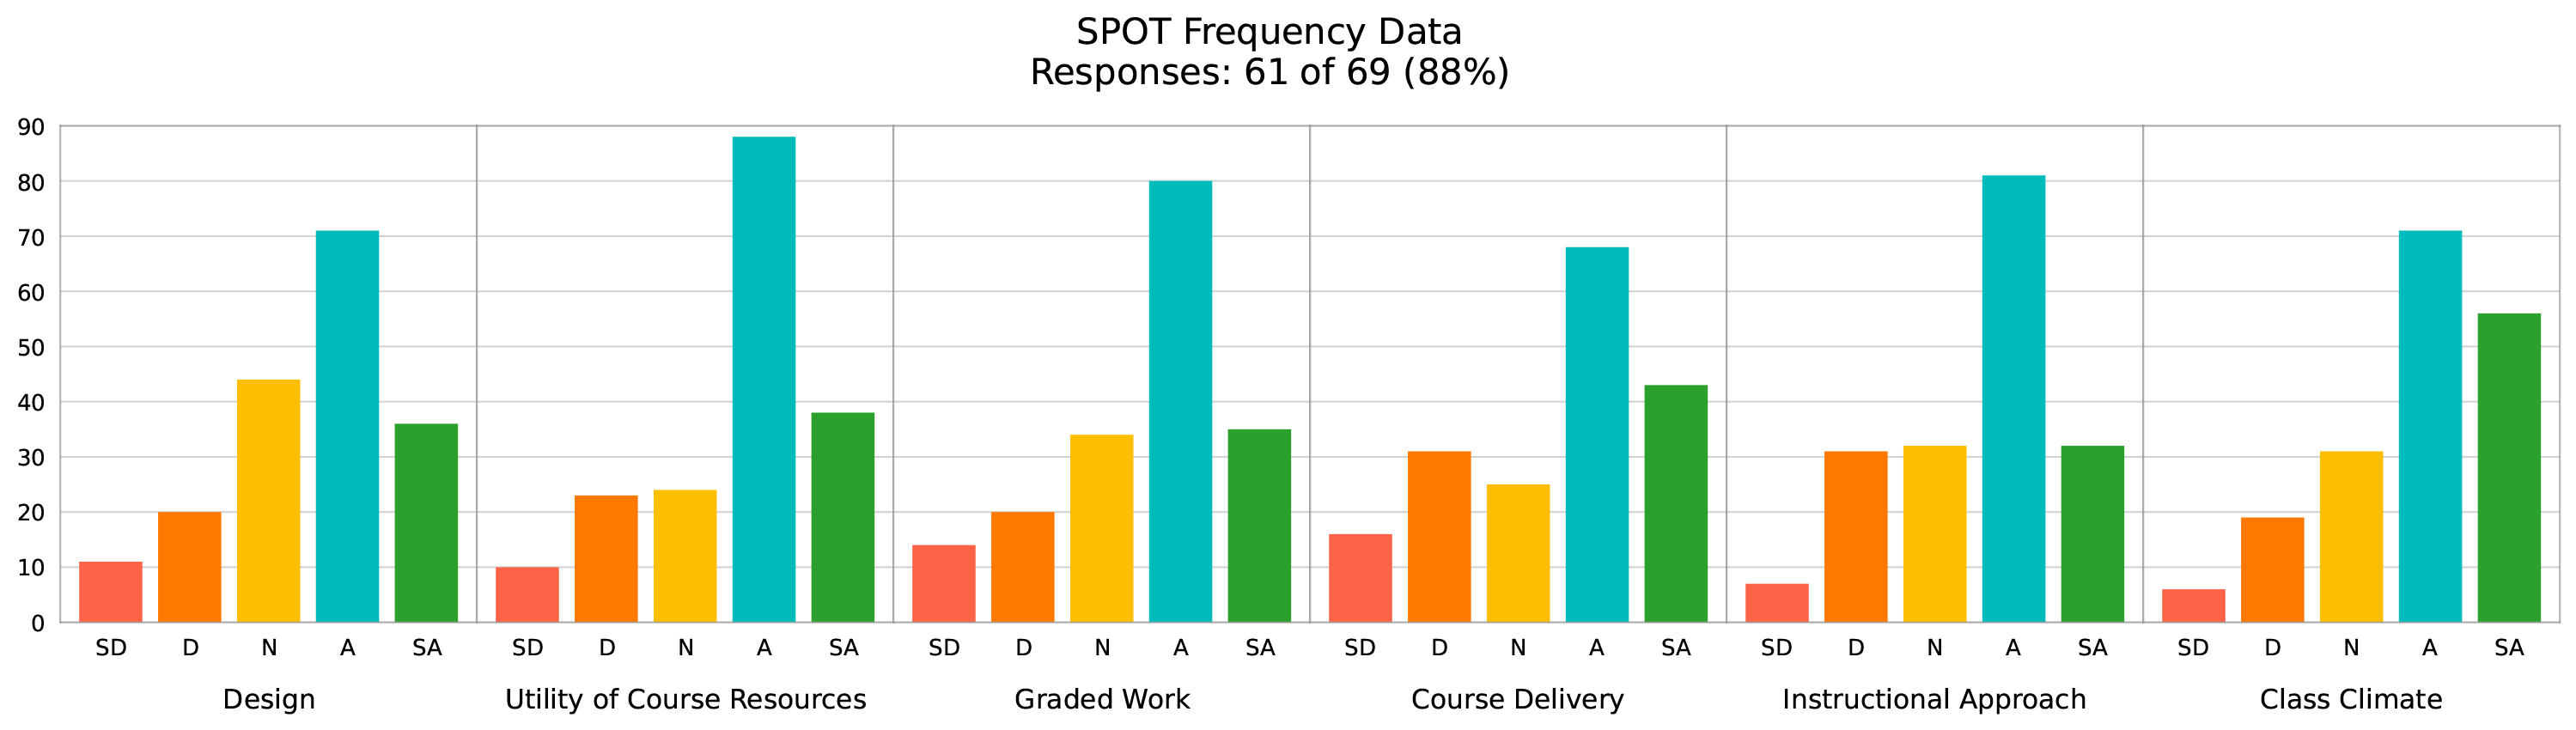 A graphic representation of the summary data tab instructors can access as part of their SPOT (Student Perspectives on Teaching) Report. The summary data contains two sections. Section one identifies student response rates by SPOT subsections; section two contains bar charts depicting student feedback breakdowns by each subsection. The bar charts indicate Strongly Agree and Agree for several domains, except for the “Course Delivery” domain, where the bar charts are spread out to include Strongly Disagree and Disagree responses along with Strongly Agree and Agree responses. 